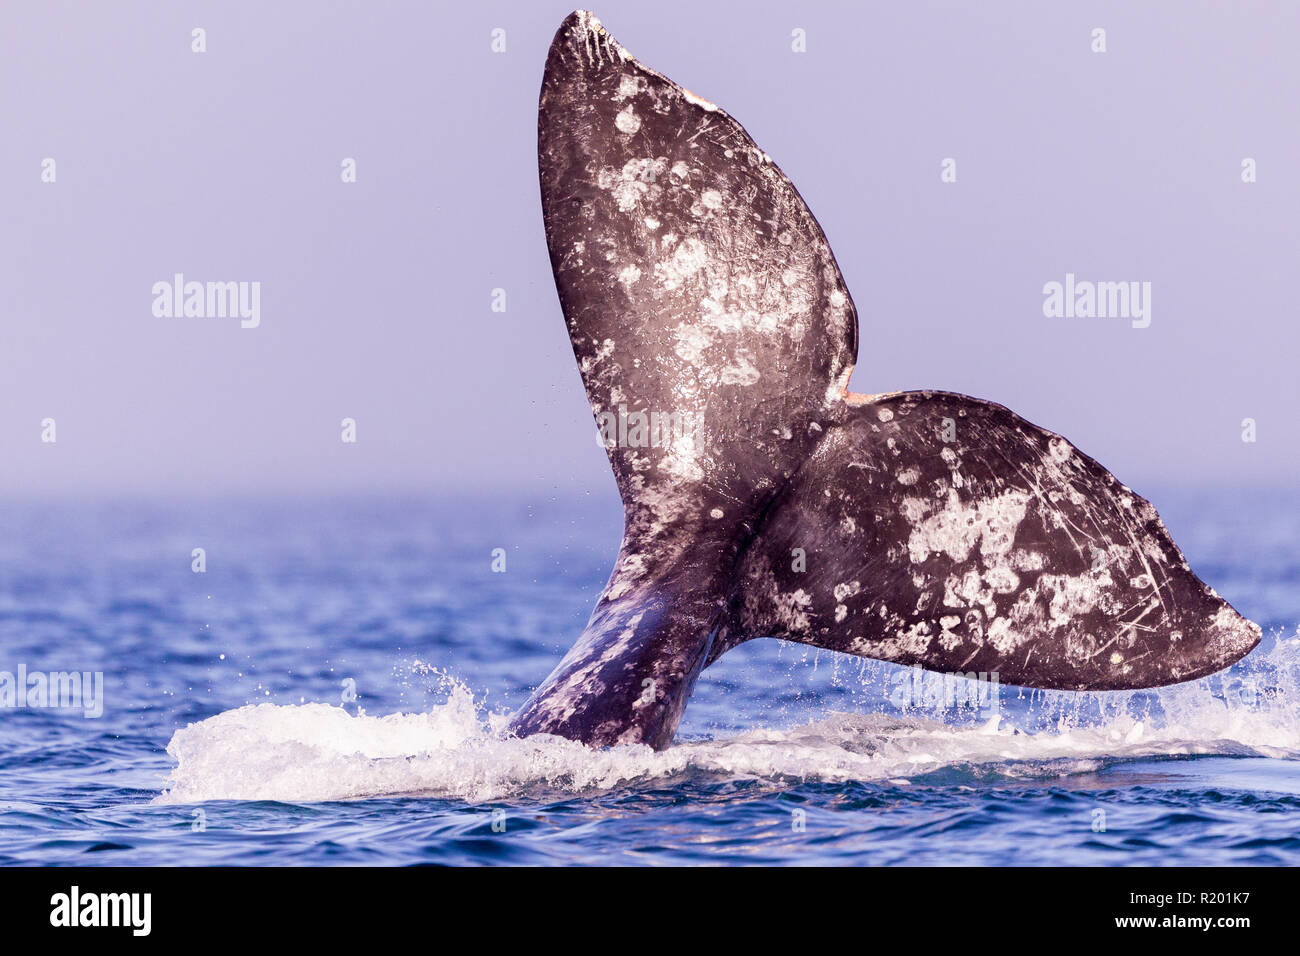 Gray Whale, Grey Whale (Eschrichtius robustus), fluke tail with trademarks that are distinctive signs of each whale. Stock Photo